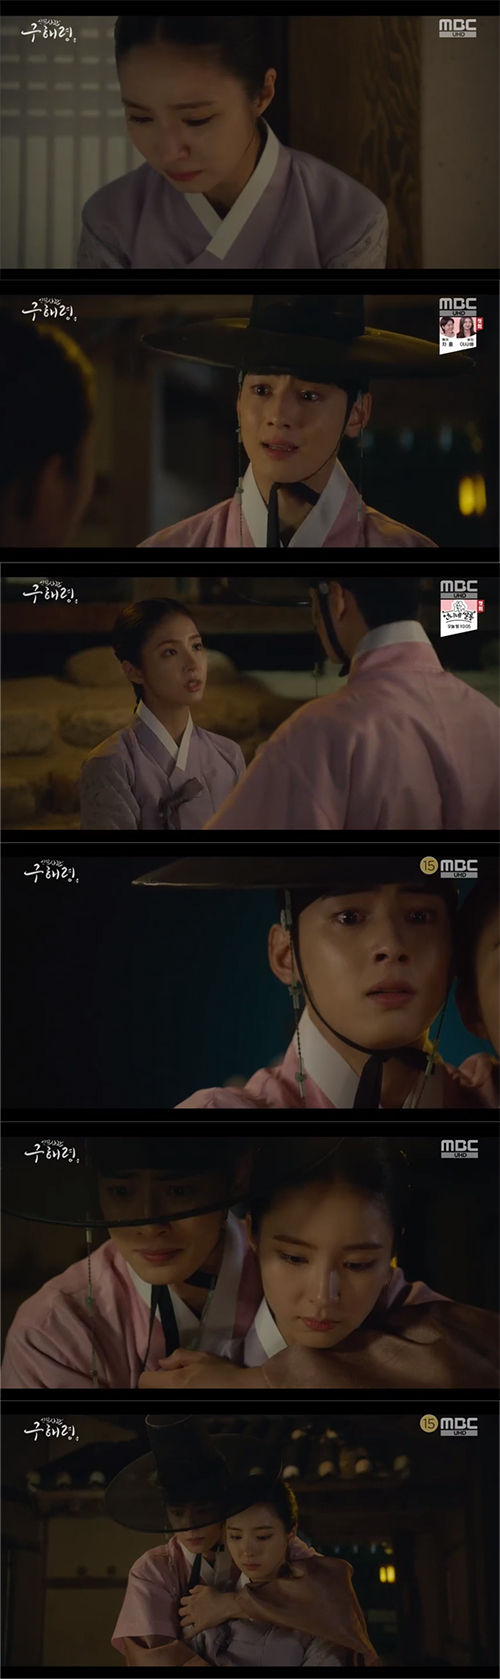 Newcomer Rookie Historian Goo Hae-ryung Shin Se-kyung and Cha Eun-woo love each other but hit the wall of reality.In the MBC drama Rookie Historian Goo Hae-ryung, which was broadcasted on the afternoon of the 5th, Kang Taek-ryong, a couple of Lee Rim (Cha Eun-woo), was shown in earnest.Rookie Historian Goo Hae-ryung (Shin Se-kyung) was issued as a preliminary recorder in the preparations, not the green house.Rookie Historian Goo Hae-ryung had to record the Wedding Bible process of the Irim, heartbreakingly.Rookie Historian Goo Hae-ryung was bitter at seeing the most likely couple, the nominee - but had to listen and record everything.That night Rookie Historian Goo Hae-ryung recalled Irim drinking alone, crying, I thought it would be okay but its not okay.Irim pretended to be okay, but he didnt. He got up early, washed his face, dressed up, went outside, wrote, and painted.Hearan (Jang Yu-bin) came to the Noksadang on behalf of Rookie Historian Goo Hae-ryung who wanted Rookie Historian Goo Hae-ryung to come to the preparations.The couple, who was a strong candidate, was eliminated due to unsavory work, and Min Ik-pyeong (Choi Duk-moon) made Song Sa-hee enter the house.Song Sa-hee said, Please step back immediately, but Min-pyeong said, Is not it you who came to me first to be my family? I decide where you need it and how to write it.My decision now is that you will become a couple of Daewon Daegun. Song Sa-hee said, What kind of use do you mean by being a couple? Min-pyeong left the post saying, I will find out. In the end, Song Sa-hee poured tears.Lee Jin (Park Ki-woong), who heard this news, could not hide his mixed heart.Lee Jin said, Did you make this picture using me? Song Sae-hee said, I just wanted to make a love for Choices. I thought I could do Choices when I became a officer, but I did not.I stayed up all night talking to Song Sa-hee and Lee Jin. The next morning, the courtesans and officers saw Song Sa-hee coming out of the palace, and rumors spread.Sejabin called Song Sahee and said, No matter what you do, I do not become your person. Song Sae-hee said, I just wanted the degradation to know my mind.I do not regret my life even if it can be broken. The name is in full-scale Wedding Bible preparations, and looking at Irim in the room alone, Husambo (Sung Ji-ru) said, Please go out and do something.Irim walked around and suddenly remembered Rookie Historian Goo Hae-ryung, who had a beautiful secret relationship with him in his arms where memories were in his arms.Eventually, Irim could not stand it and went to the house of Rookie Historian Goo Hae-ryung.I will go to a place where no one knows, and lets live together. He confessed his heart with tears, I will give up everything. But Rookie Historian Goo Hae-ryung refused, Reality is not a novel, and said, You may regret me later, go back.I am the only person who should be this much, he said.Irim poured tears and said, Do you know that I am the only one? But Rookie Historian Goo Hae-ryung said to the end, Im sorry.I am not the whole of Daewon, he said.Cha Eun-woo and Shin Se-kyung, who continued their love affair, hit the inevitable wall of reality.I love each other, but I hide my heart and I see two people crying and tears, and the eyes of viewers are reddened.How to cross the wall of reality in front of you, the romance and growth of the two people gather expectations.Photo  MBC Broadcasting Screen